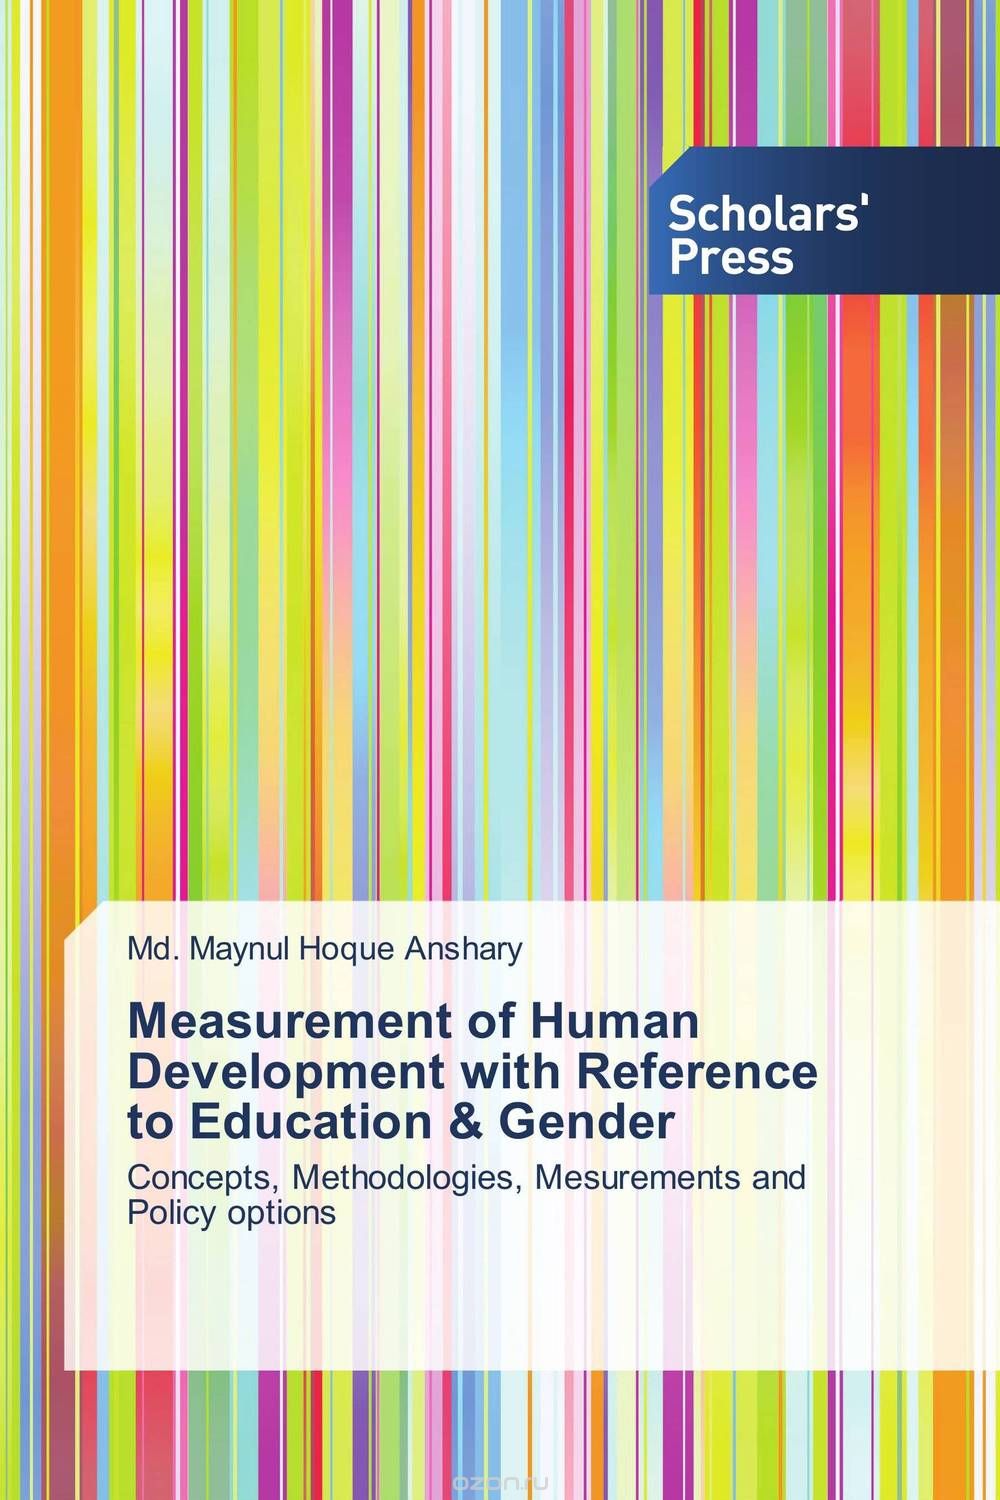 Measurement of Human Development with Reference to Education & Gender